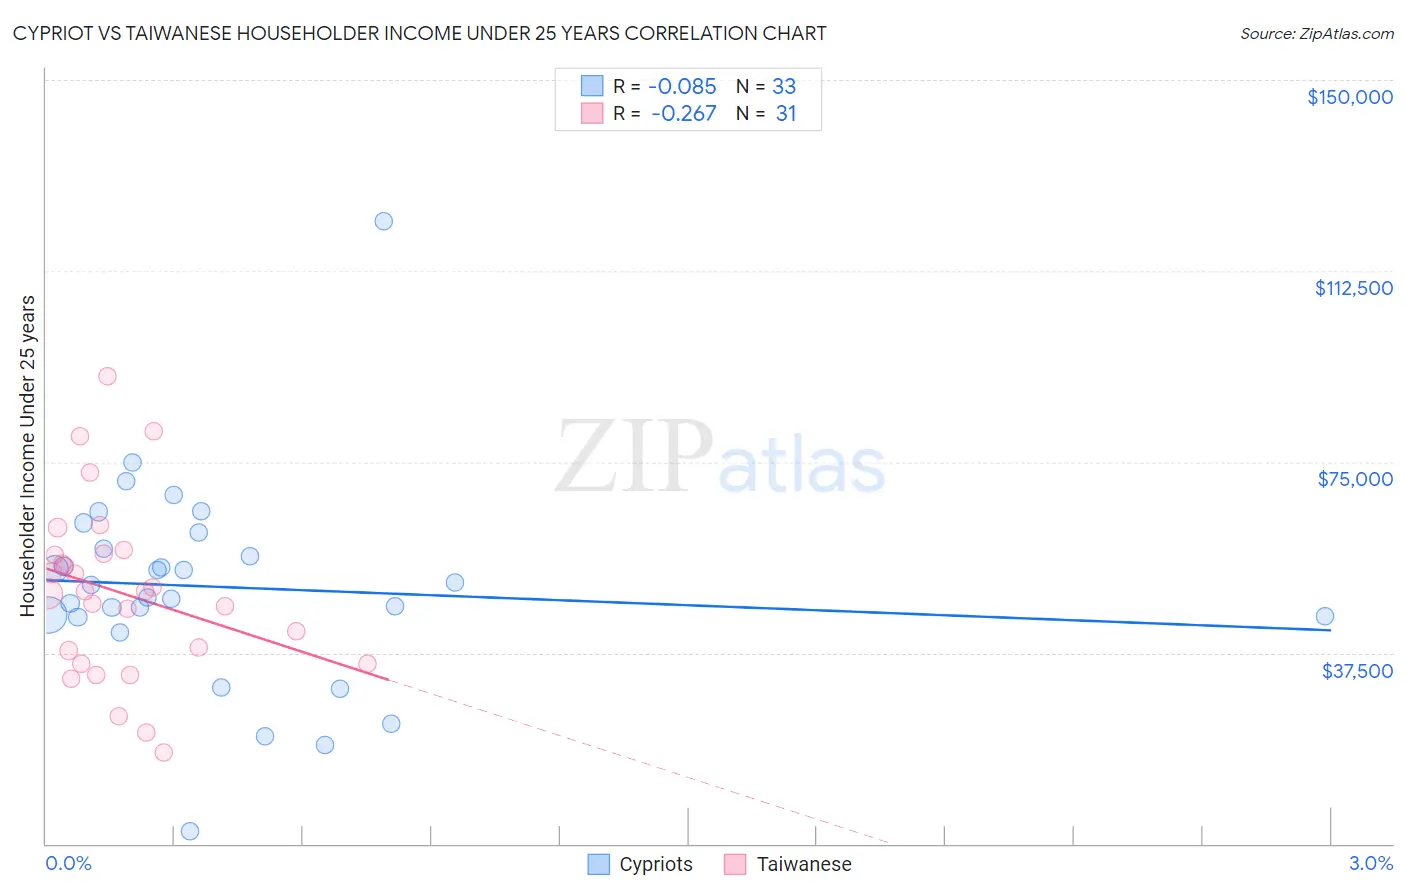 Cypriot vs Taiwanese Householder Income Under 25 years